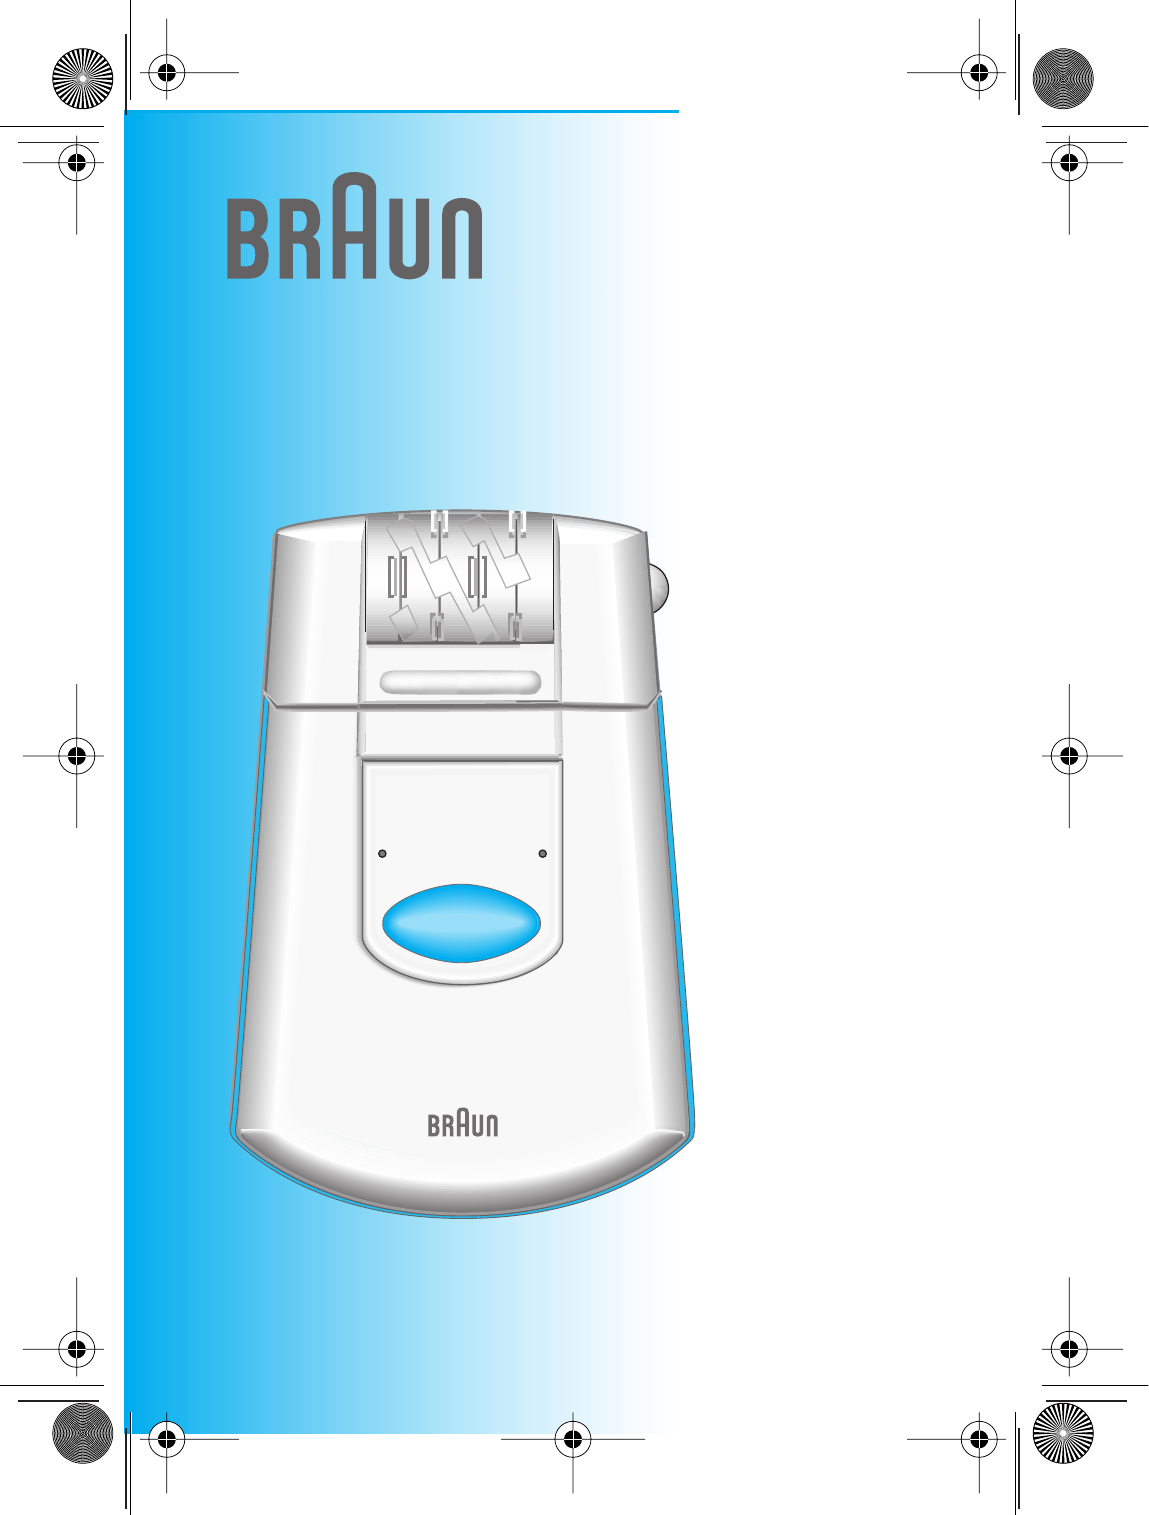 Braun Silk-épil SuperSoft User Manual | 42 pages | Also for: EE 1595